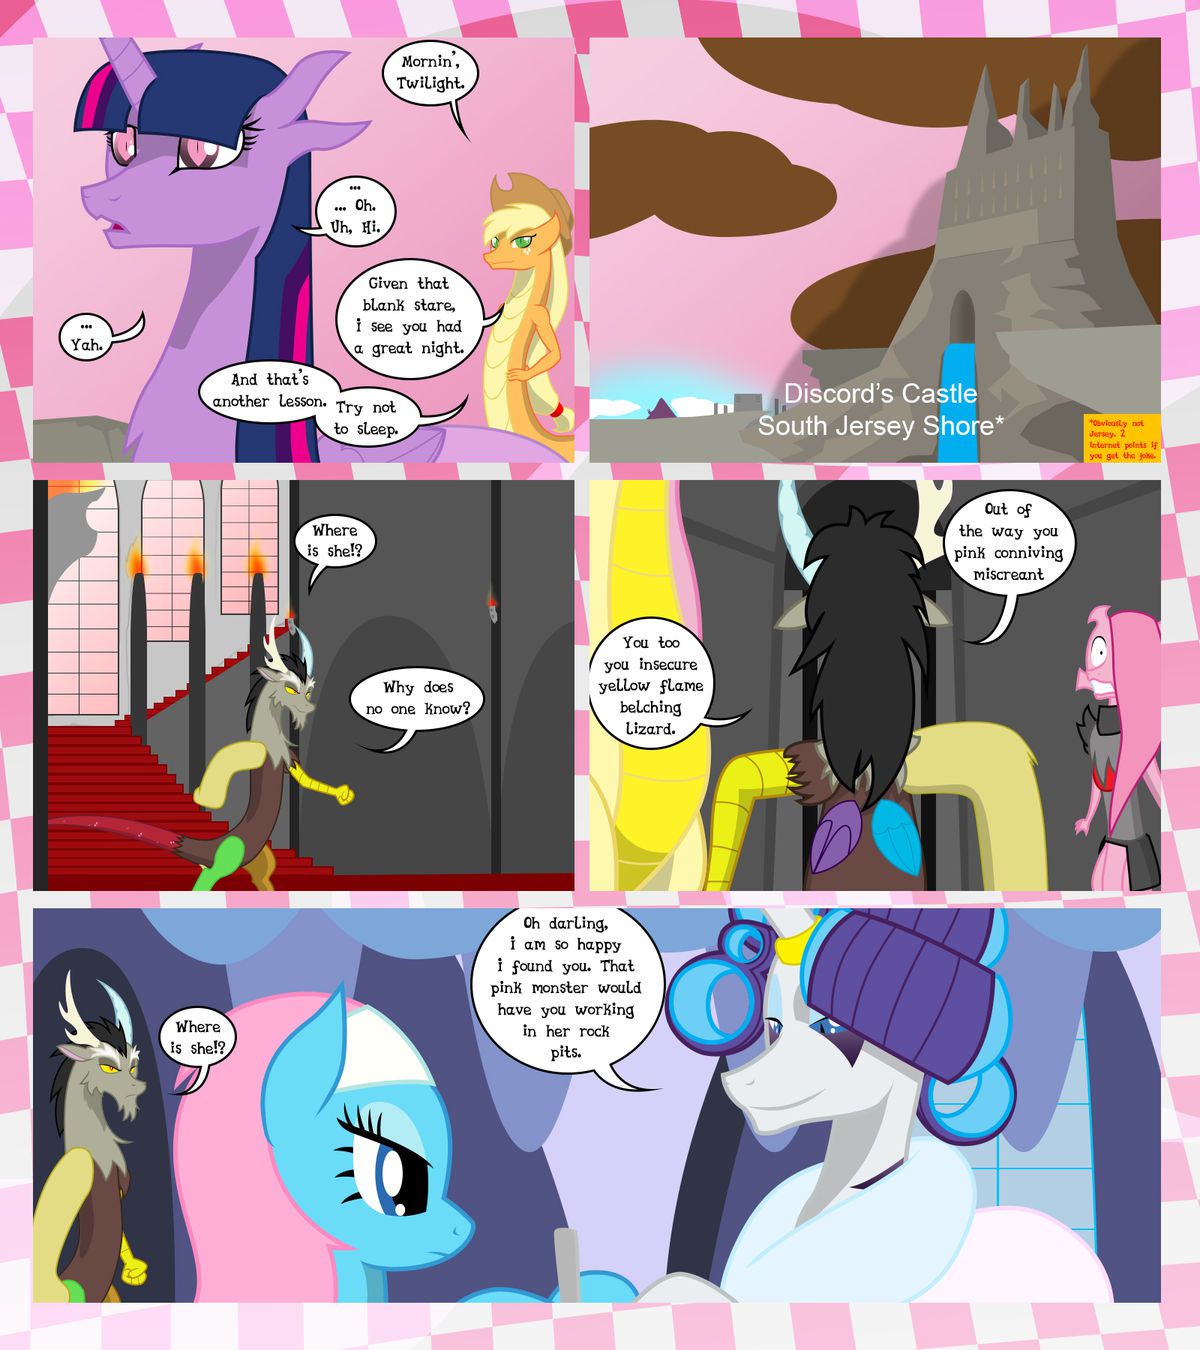 [GatesMcCloud] Cutie Mark Crusaders 10k: Chapter 3 - The Lost (My Little Pony: Friendship is Magic) [English] [Ongoing] 65